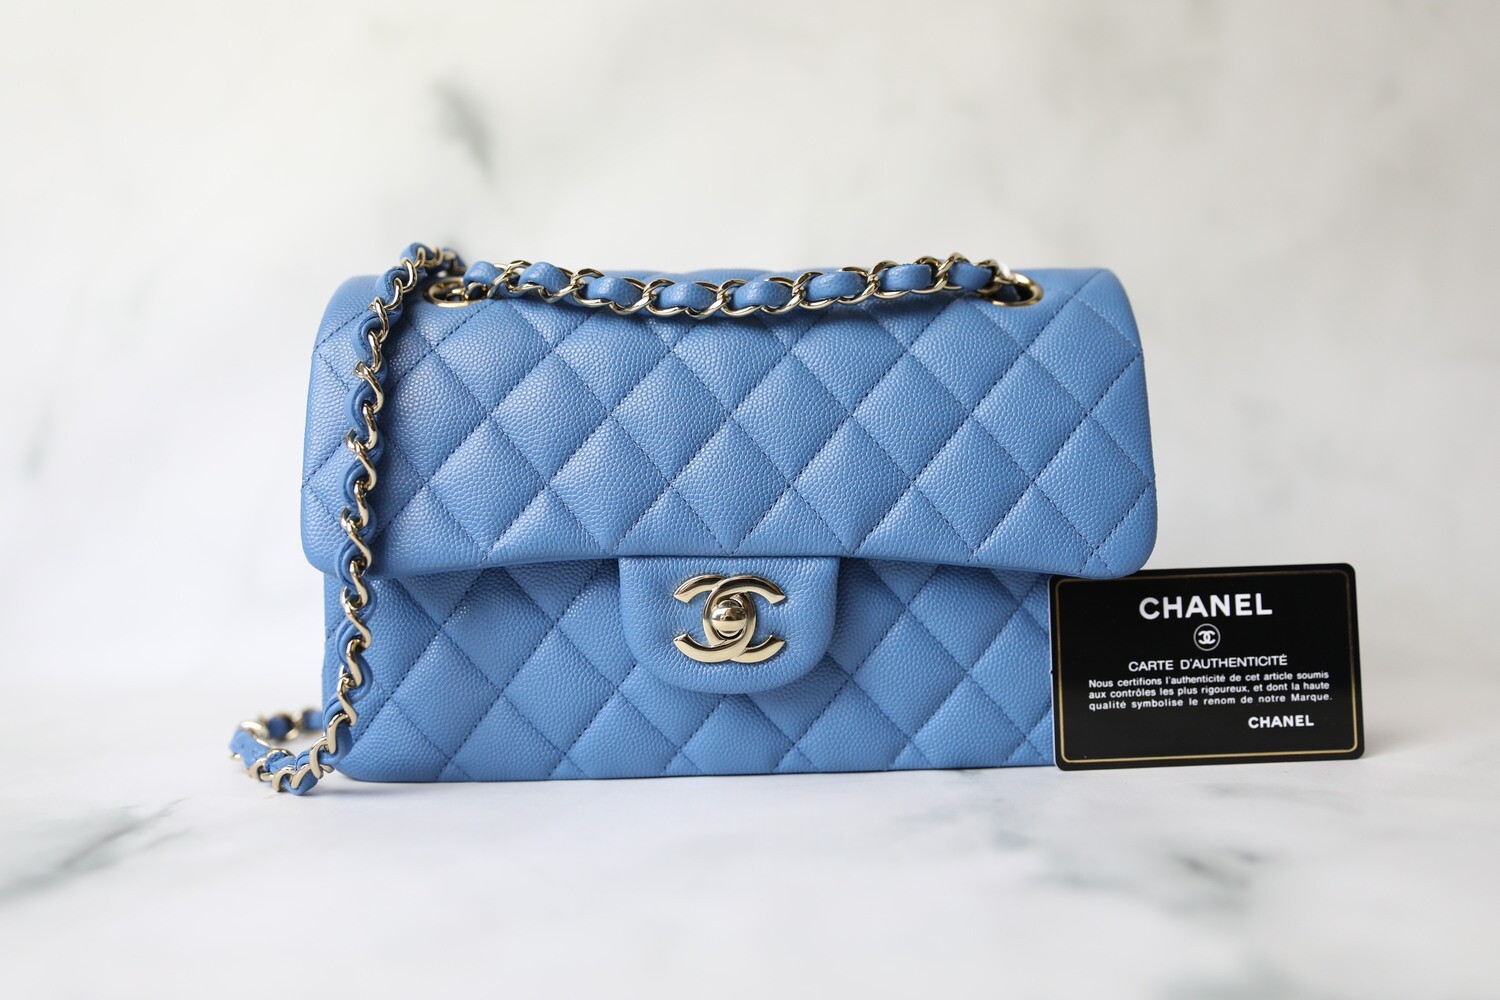 Chanel Classic Small, 21P Blue Caviar with Gold Hardware, New in